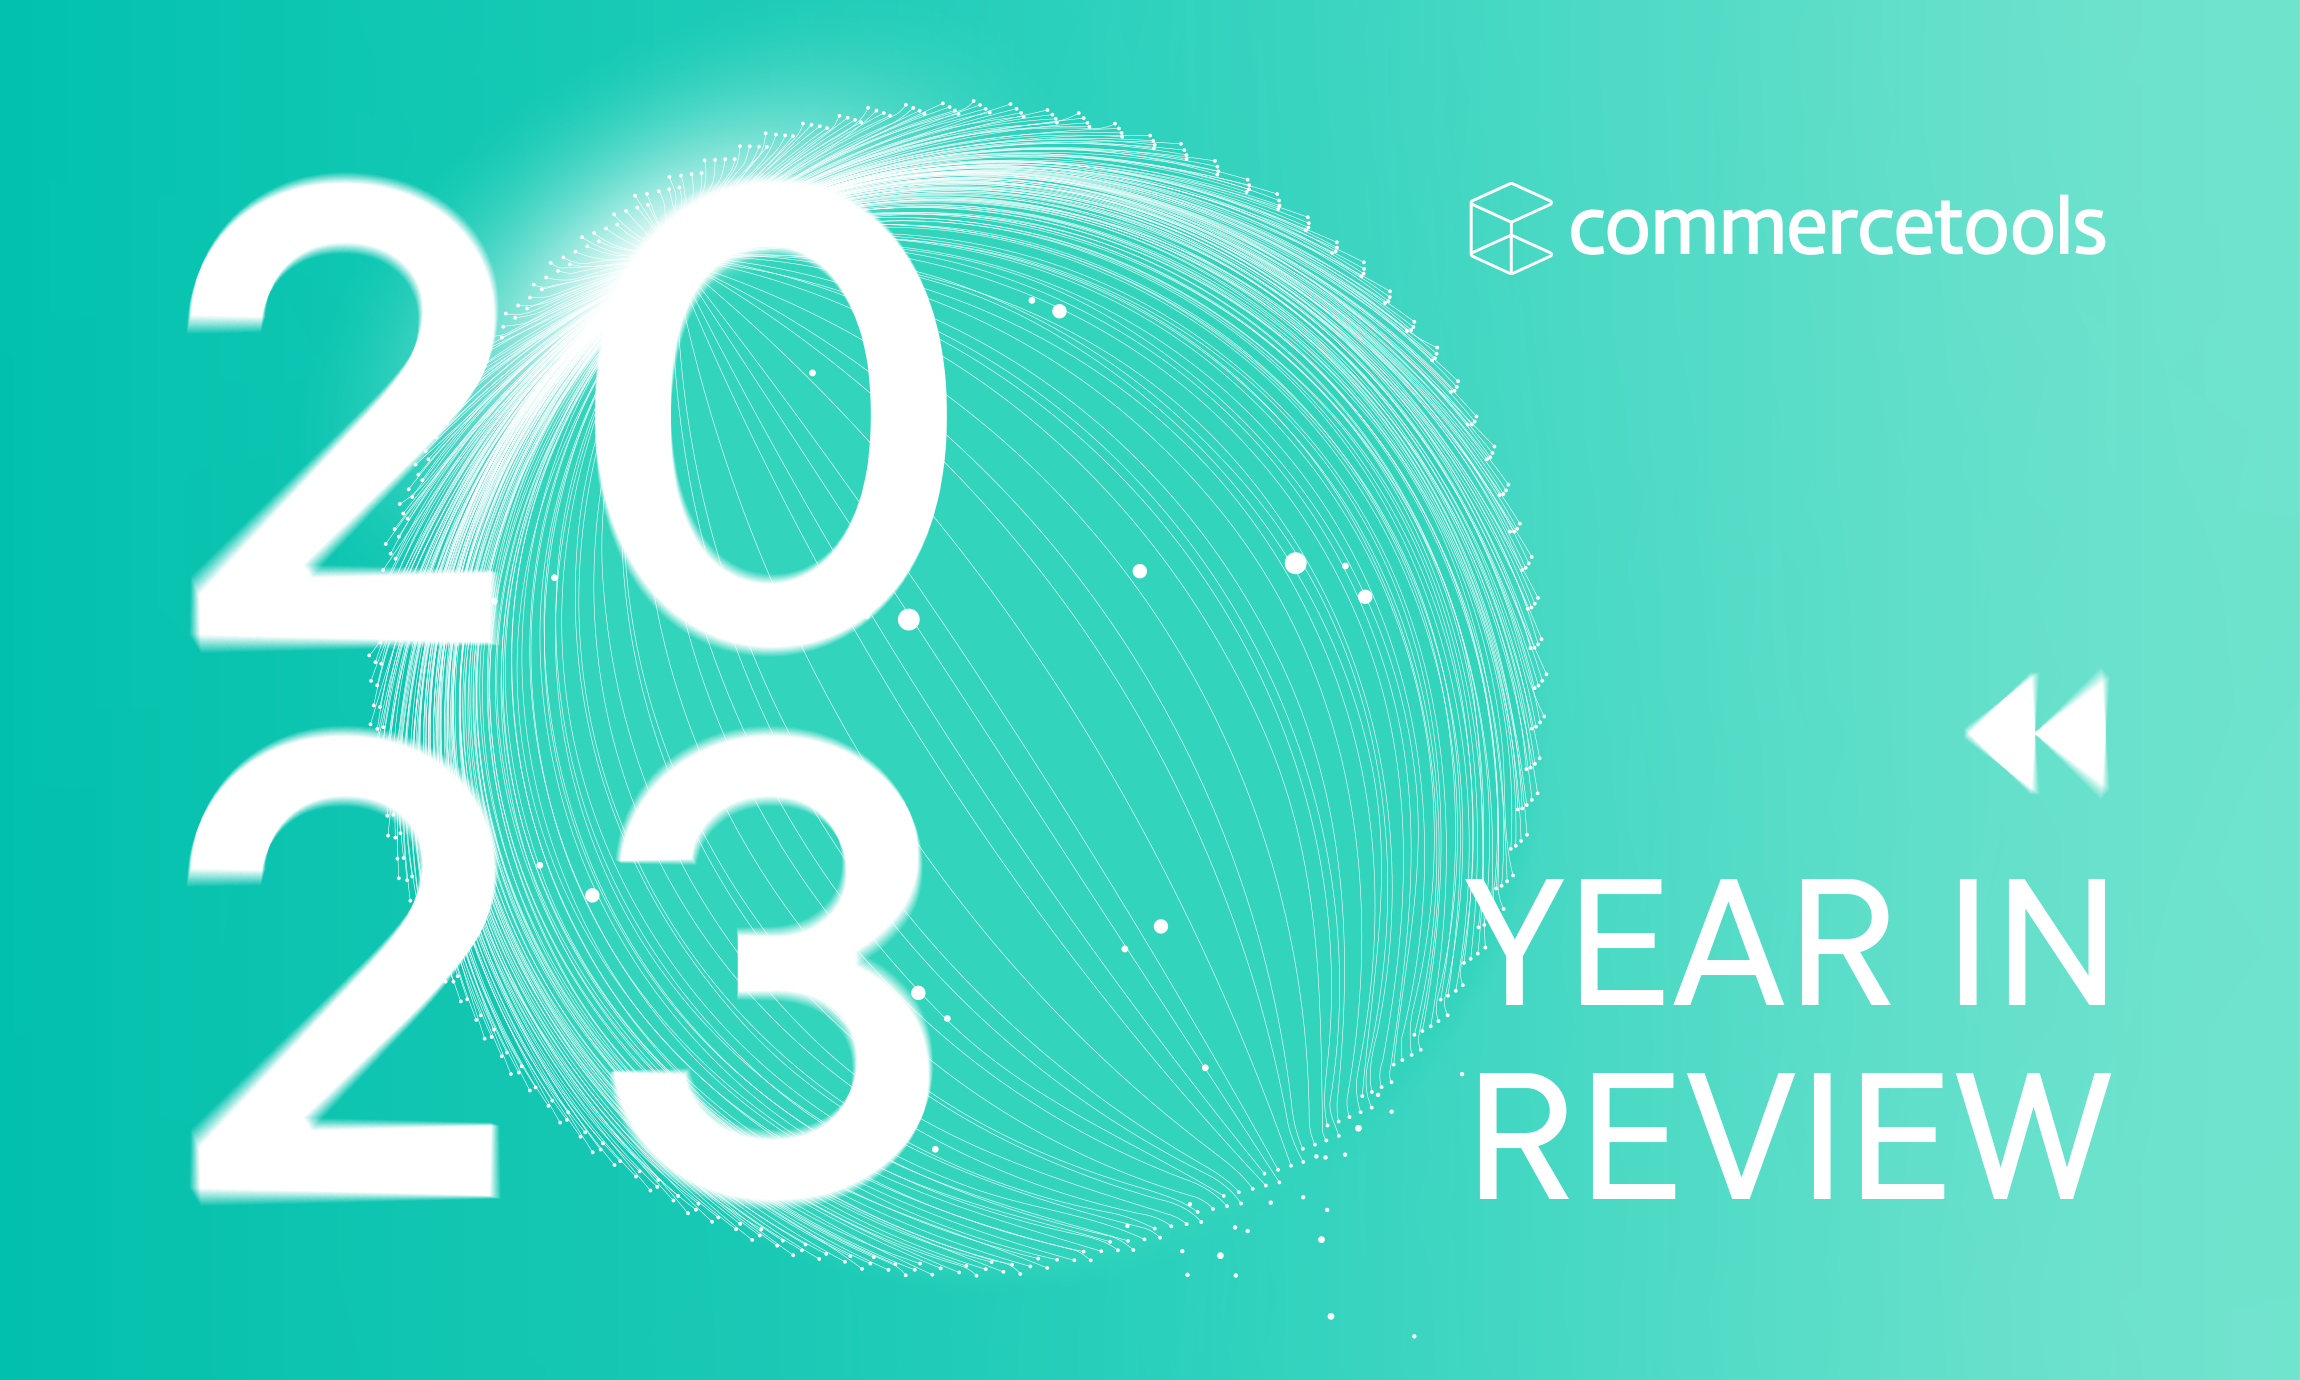 The Year in Review: The most significant moments impacting the growth of commercetools